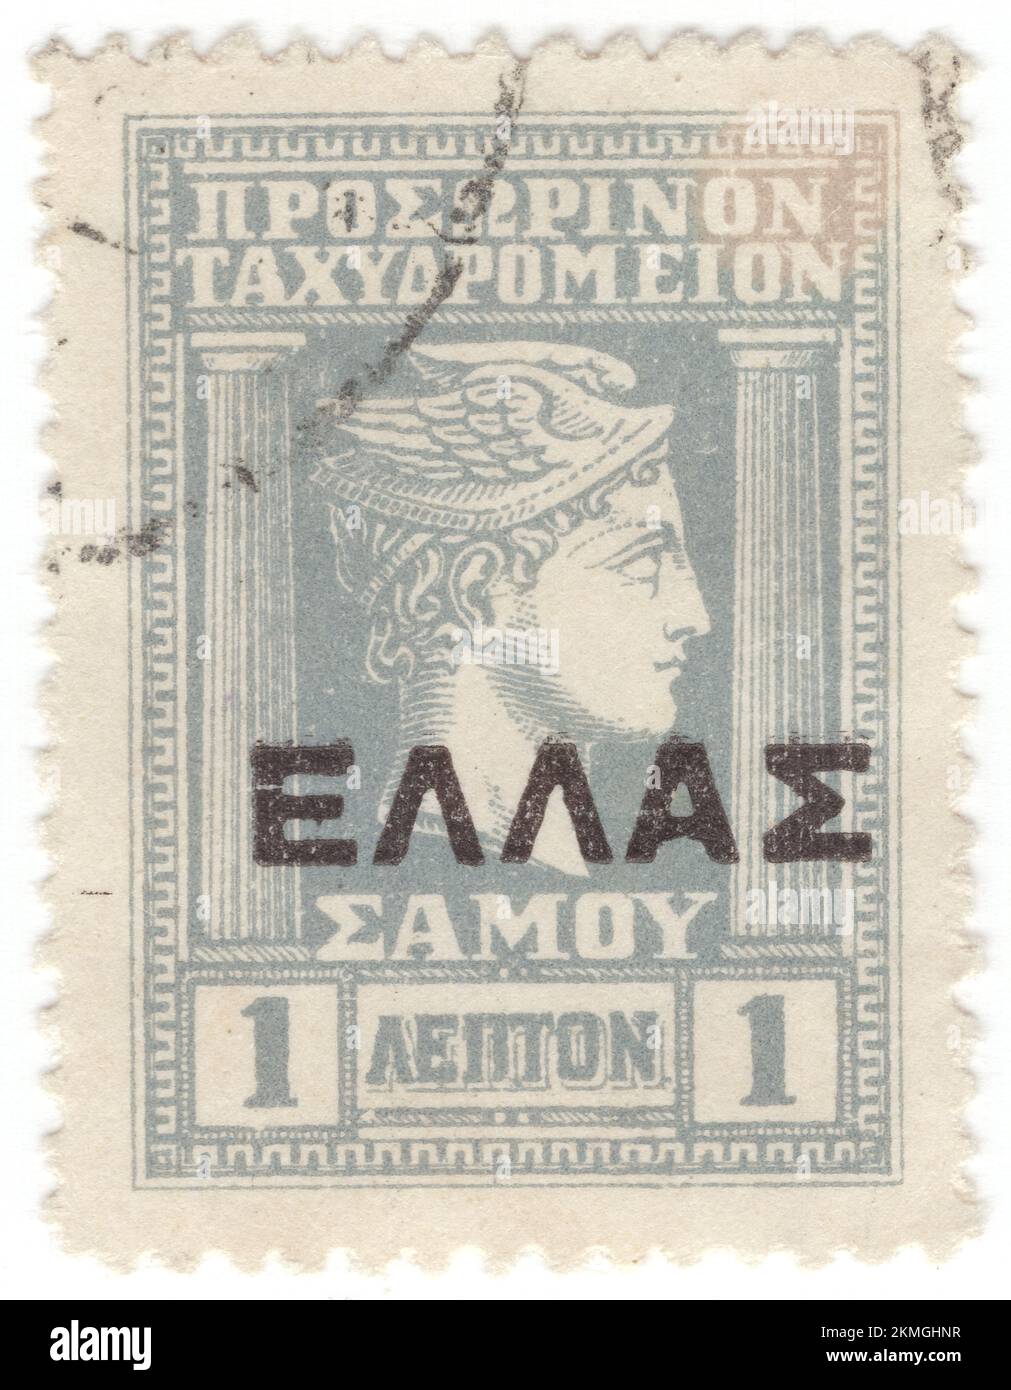 GREECE - 1912: An 1 lepta grey regular (occupation) issue postage stamp depicting Hermes (Mercury), Olympian deity in ancient Greek religion and mythology. Member of the Twelve Olympians. Hermes is considered the herald of the gods. He is also considered the protector of human heralds, travellers, thieves, merchants, and orators. He is able to move quickly and freely between the worlds of the mortal and the divine, aided by his winged sandals. Hermes plays the role of the psychopomp or 'soul guide'—a conductor of souls into the afterlife Stock Photo